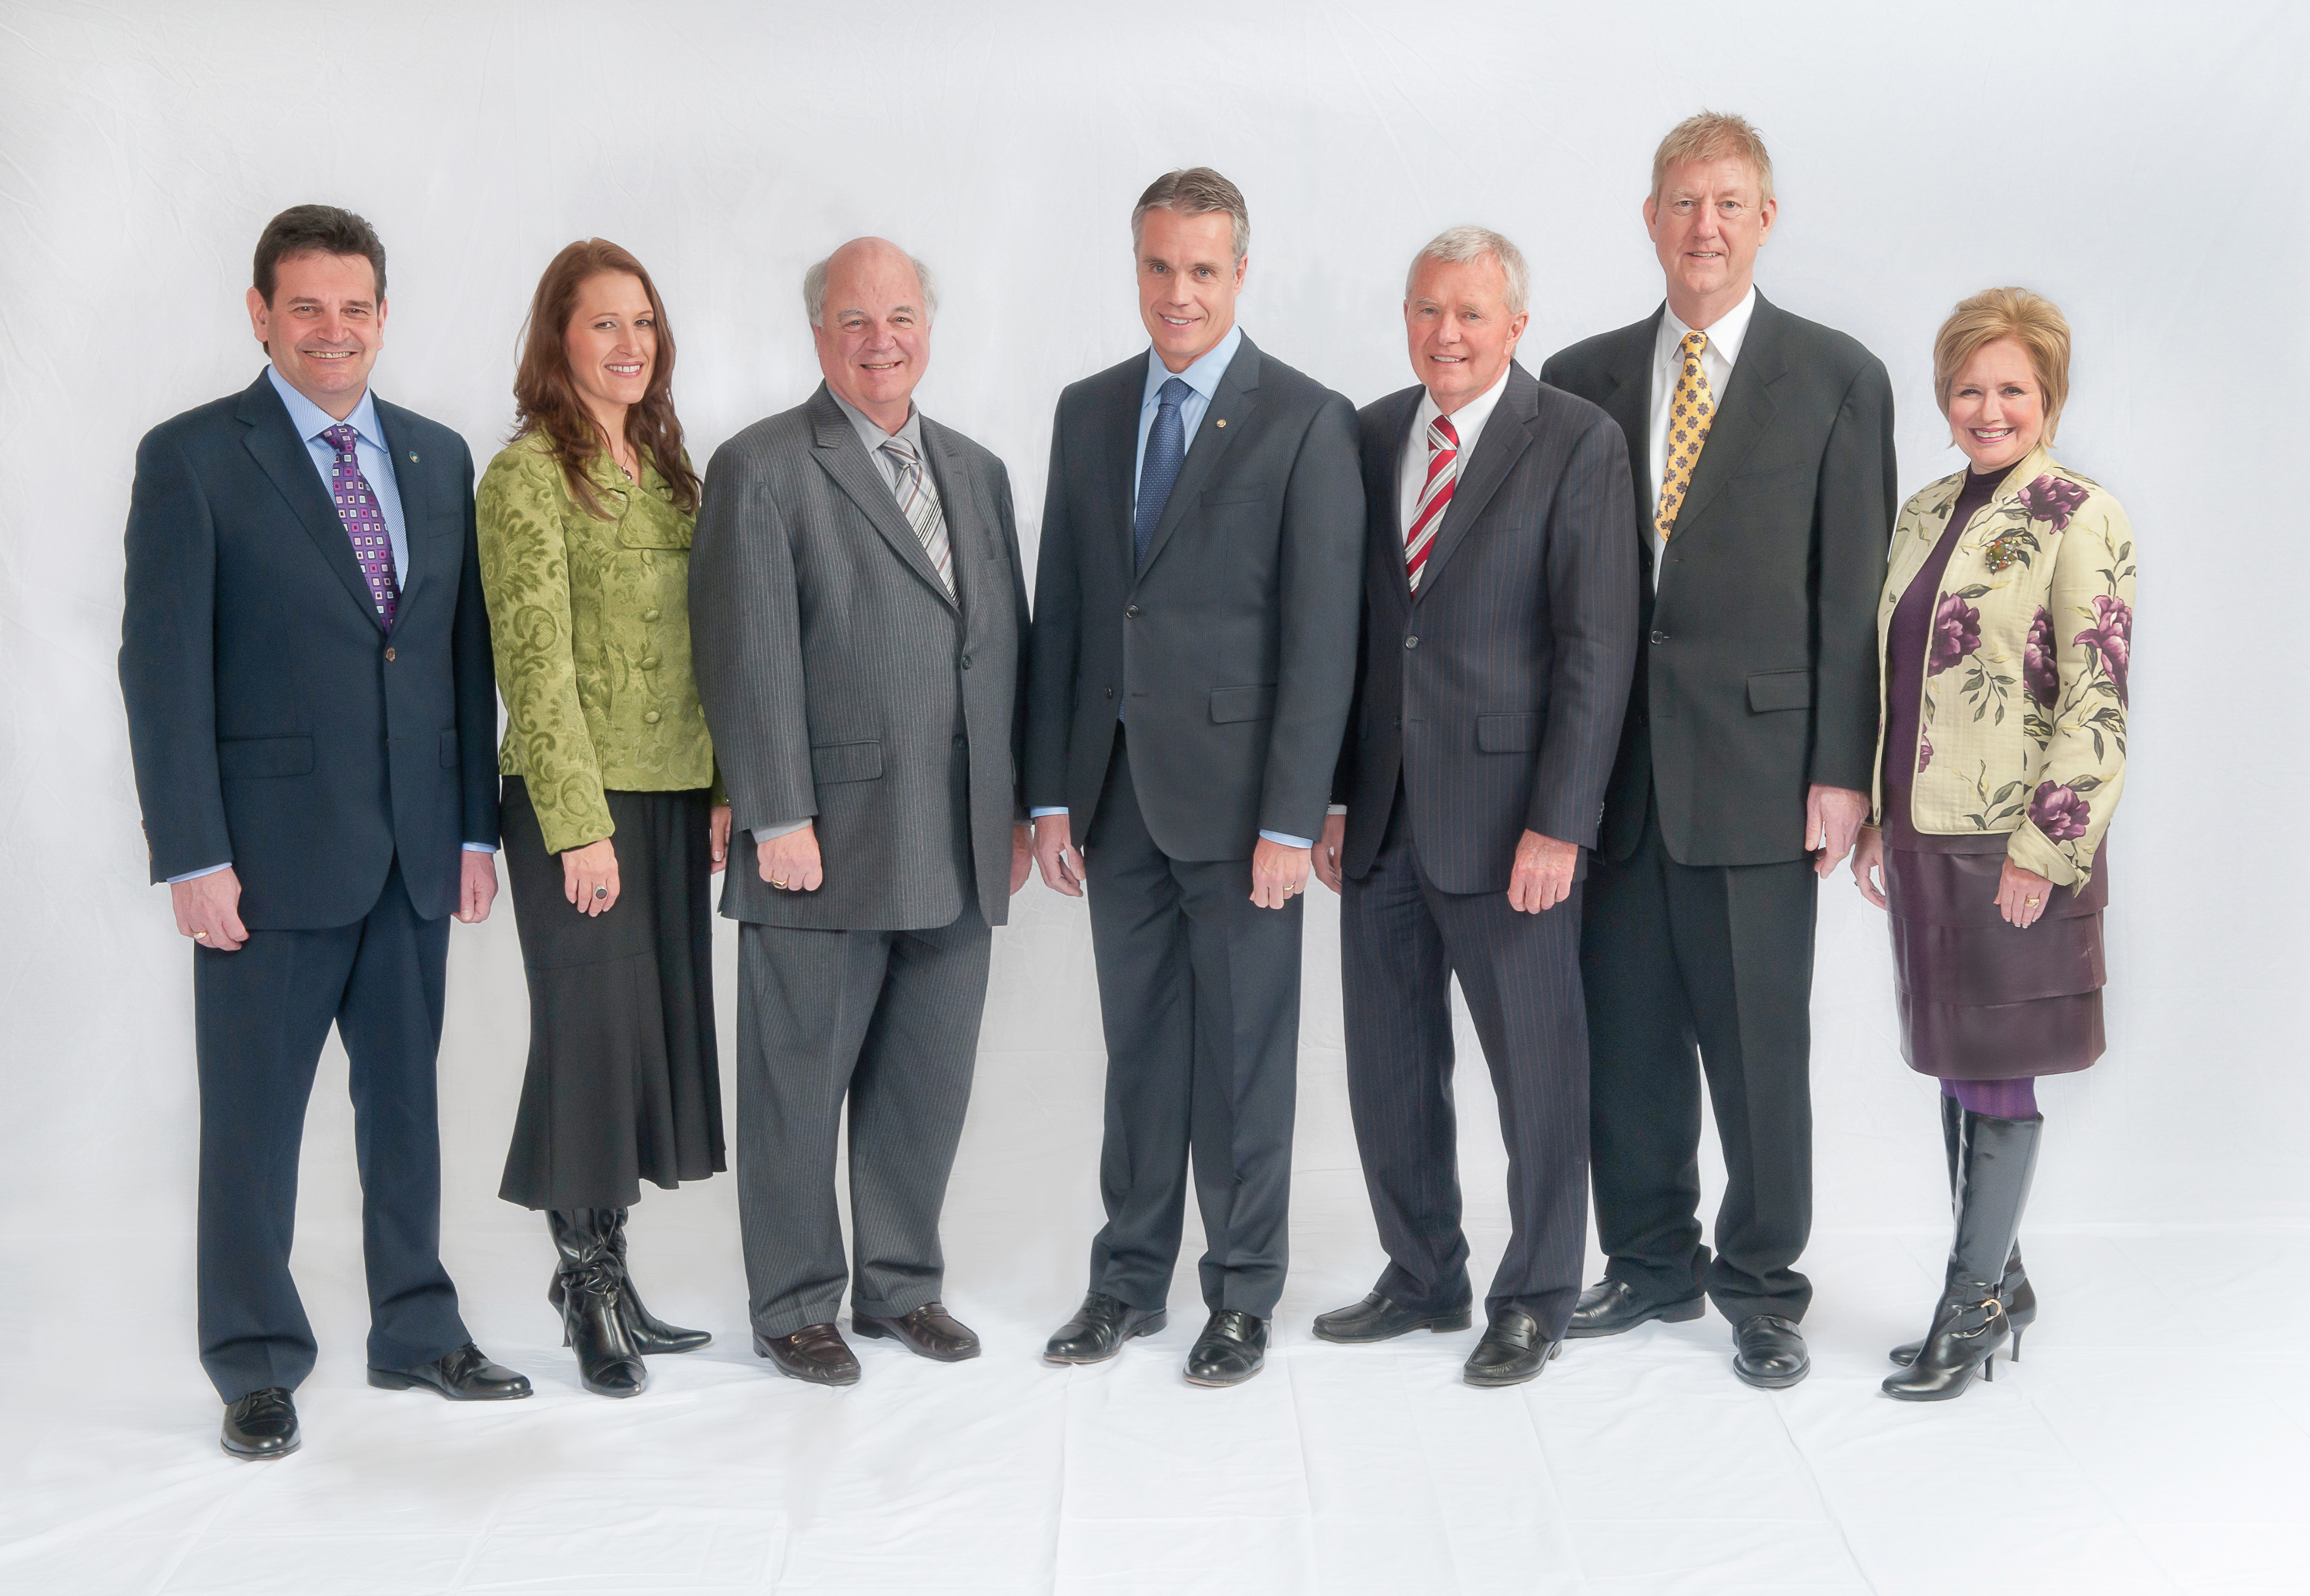 Your city council members: The Significant Seven.